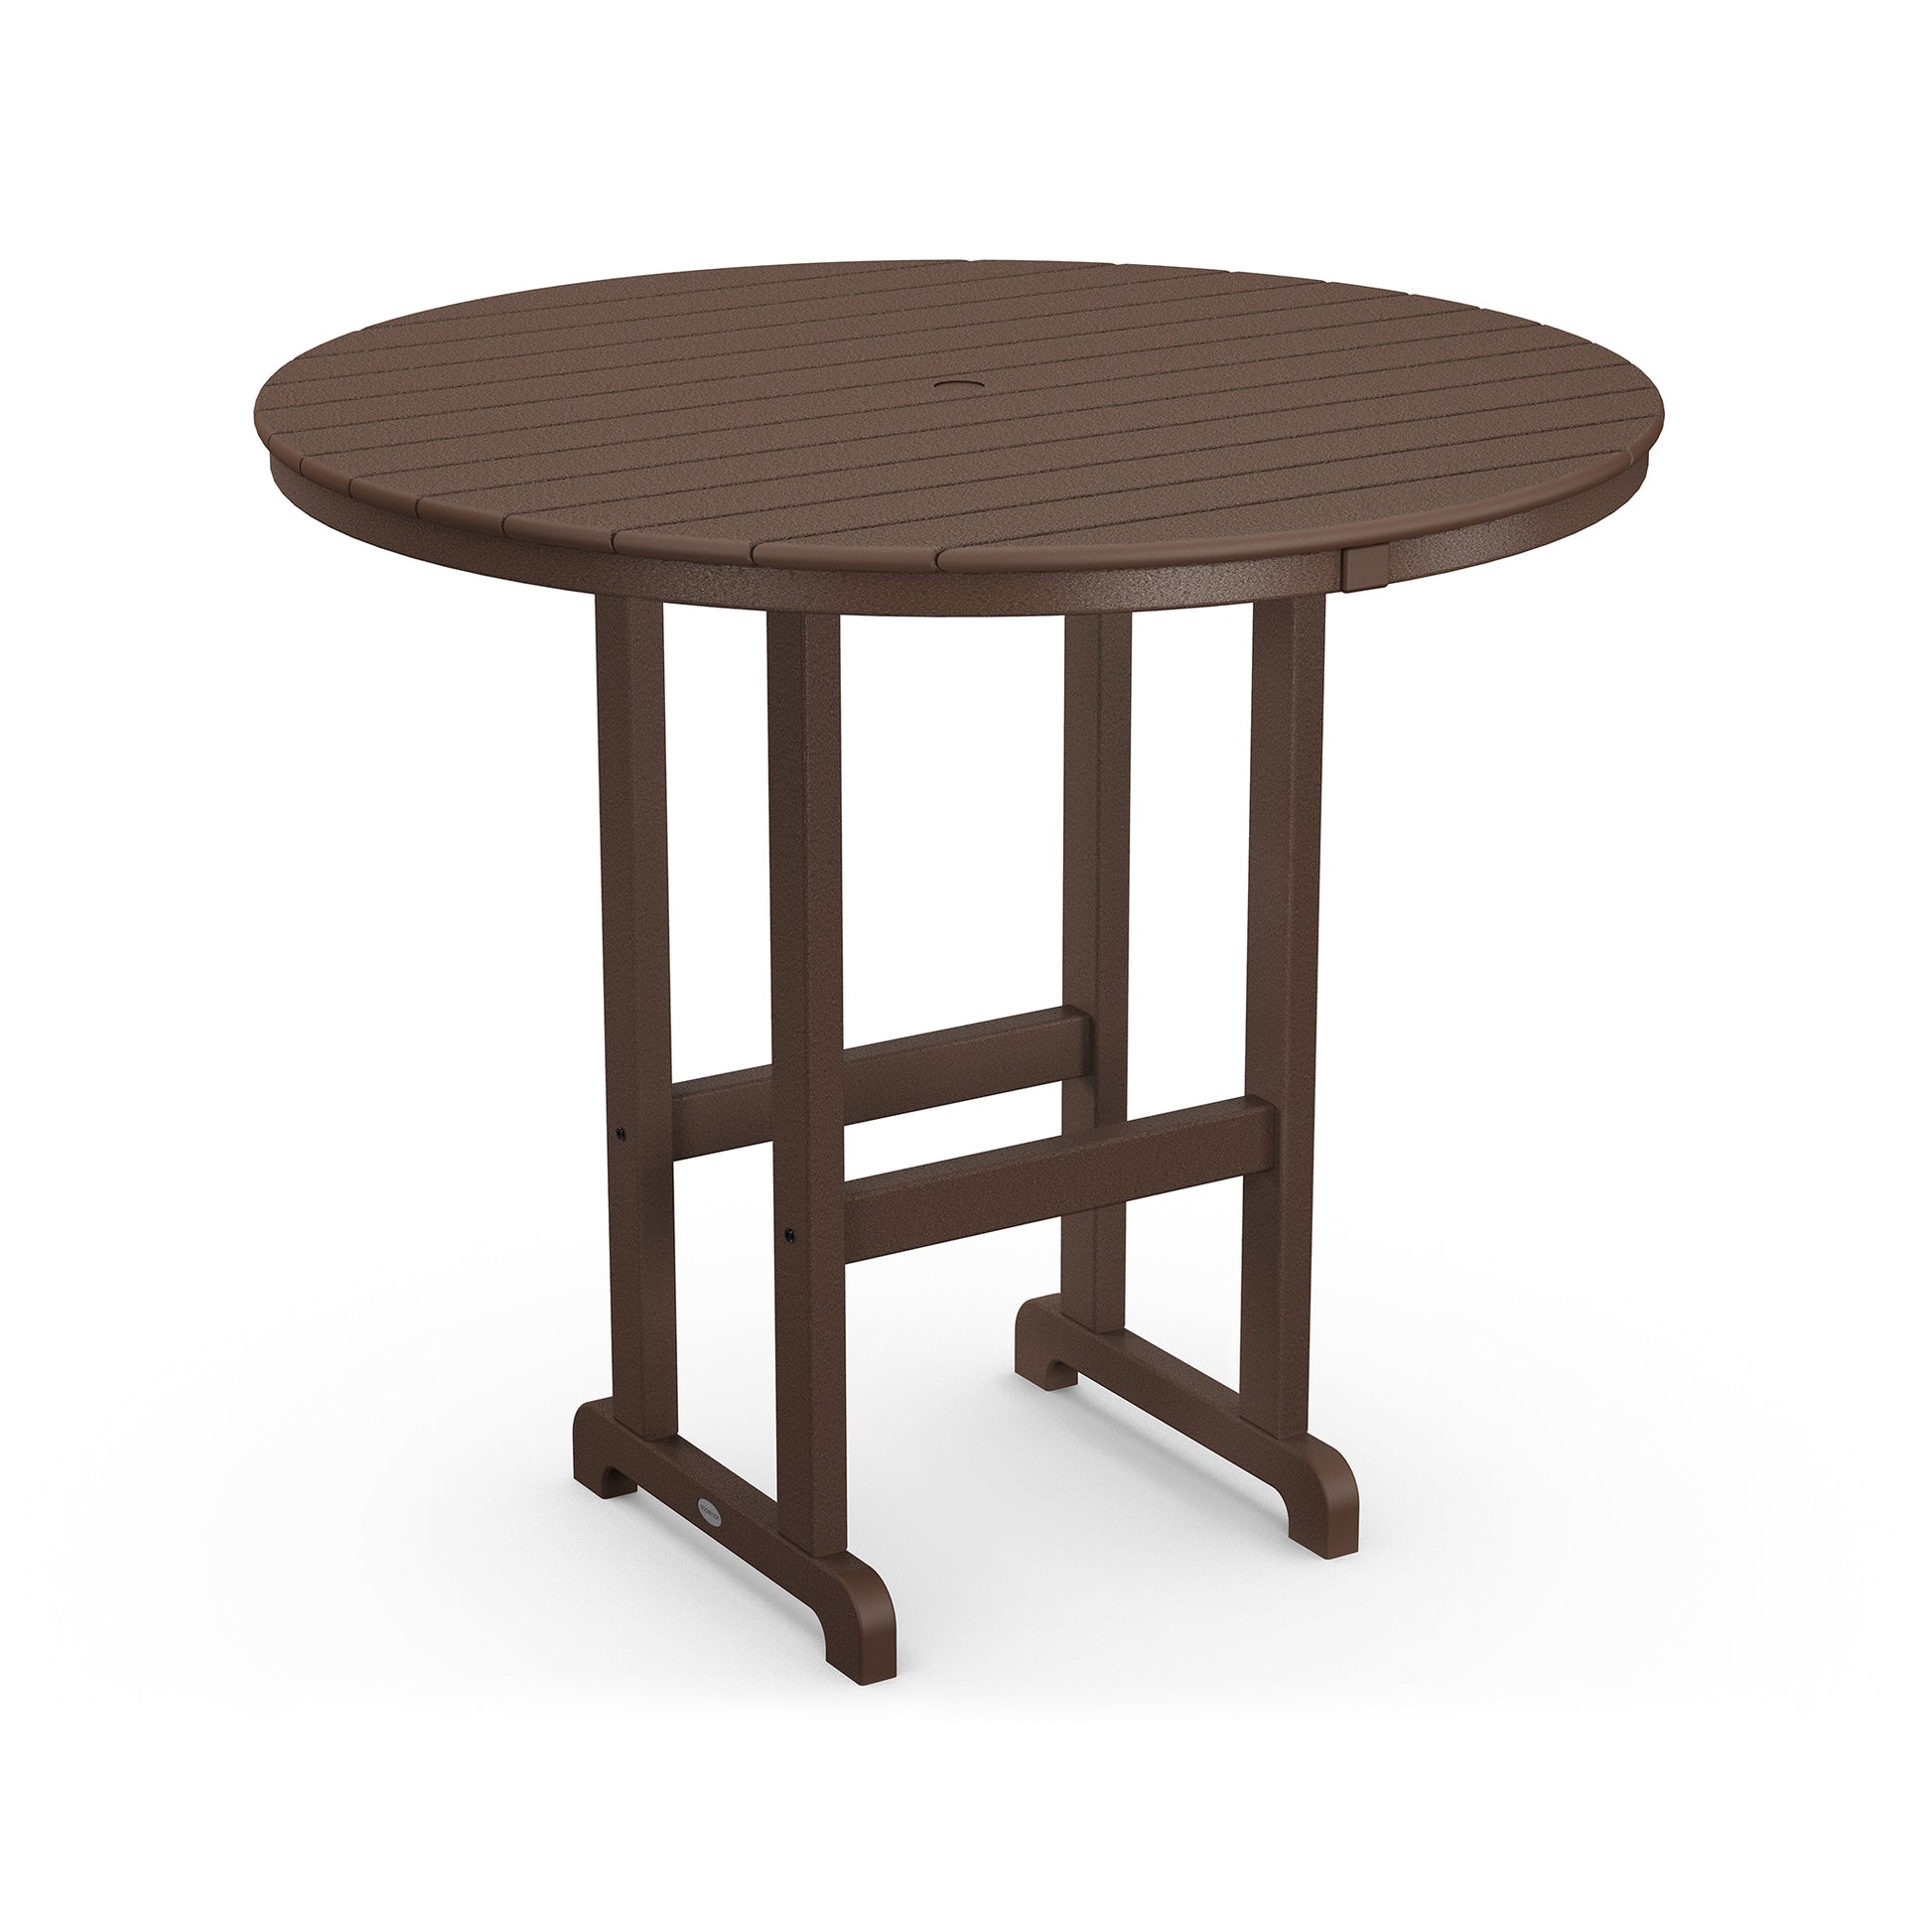 A round, brown POLYWOOD® outdoor 48" Round Bar Table with a slatted top and a sturdy base, isolated on a white background.